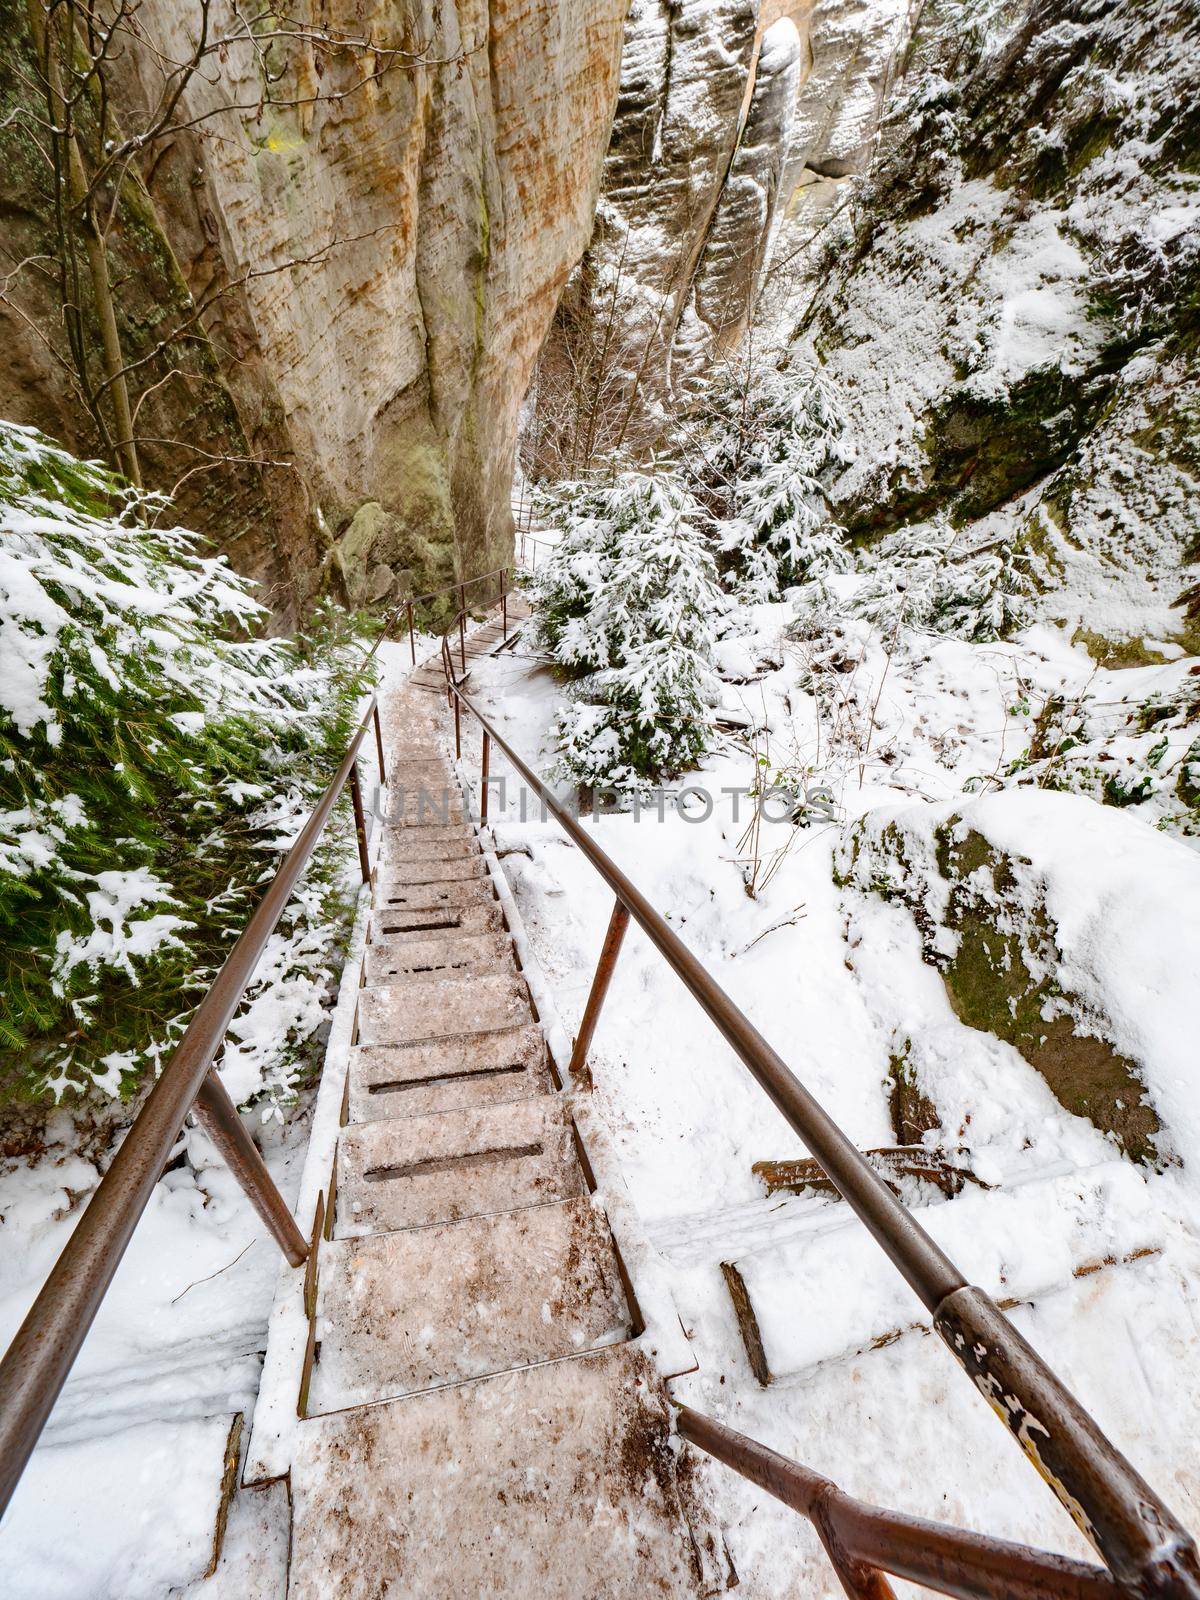 Ladder, wooden staircase and steel banister in Sandstone rocky labyrinth at Adrspach town, Czech Republic. Visit park in winter season